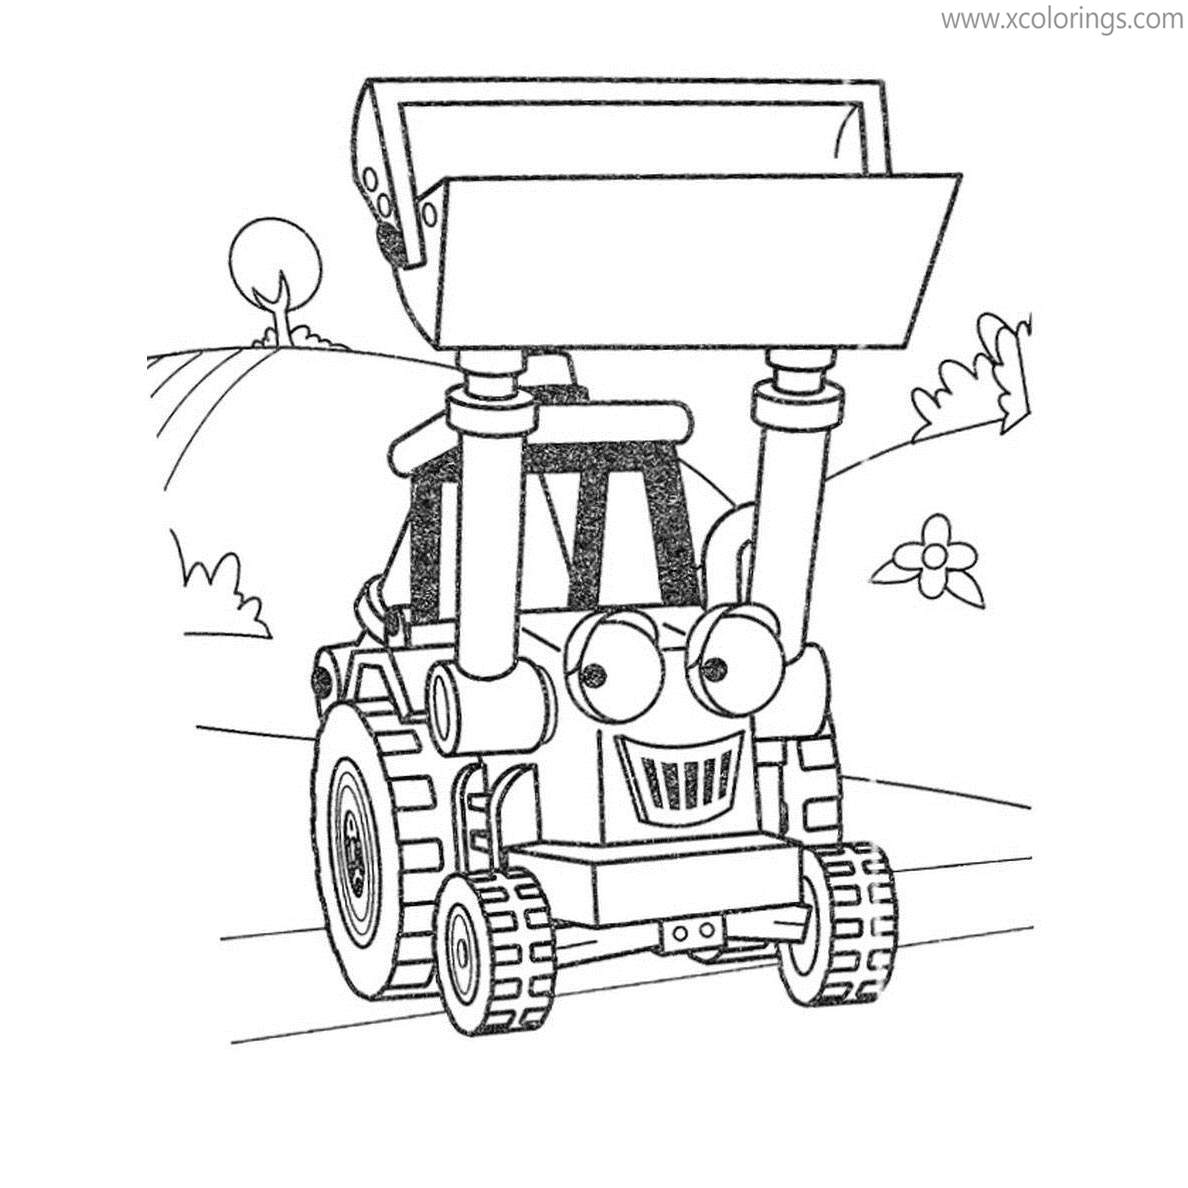 Free Bob The Builder Machines Coloring Pages Scoop printable